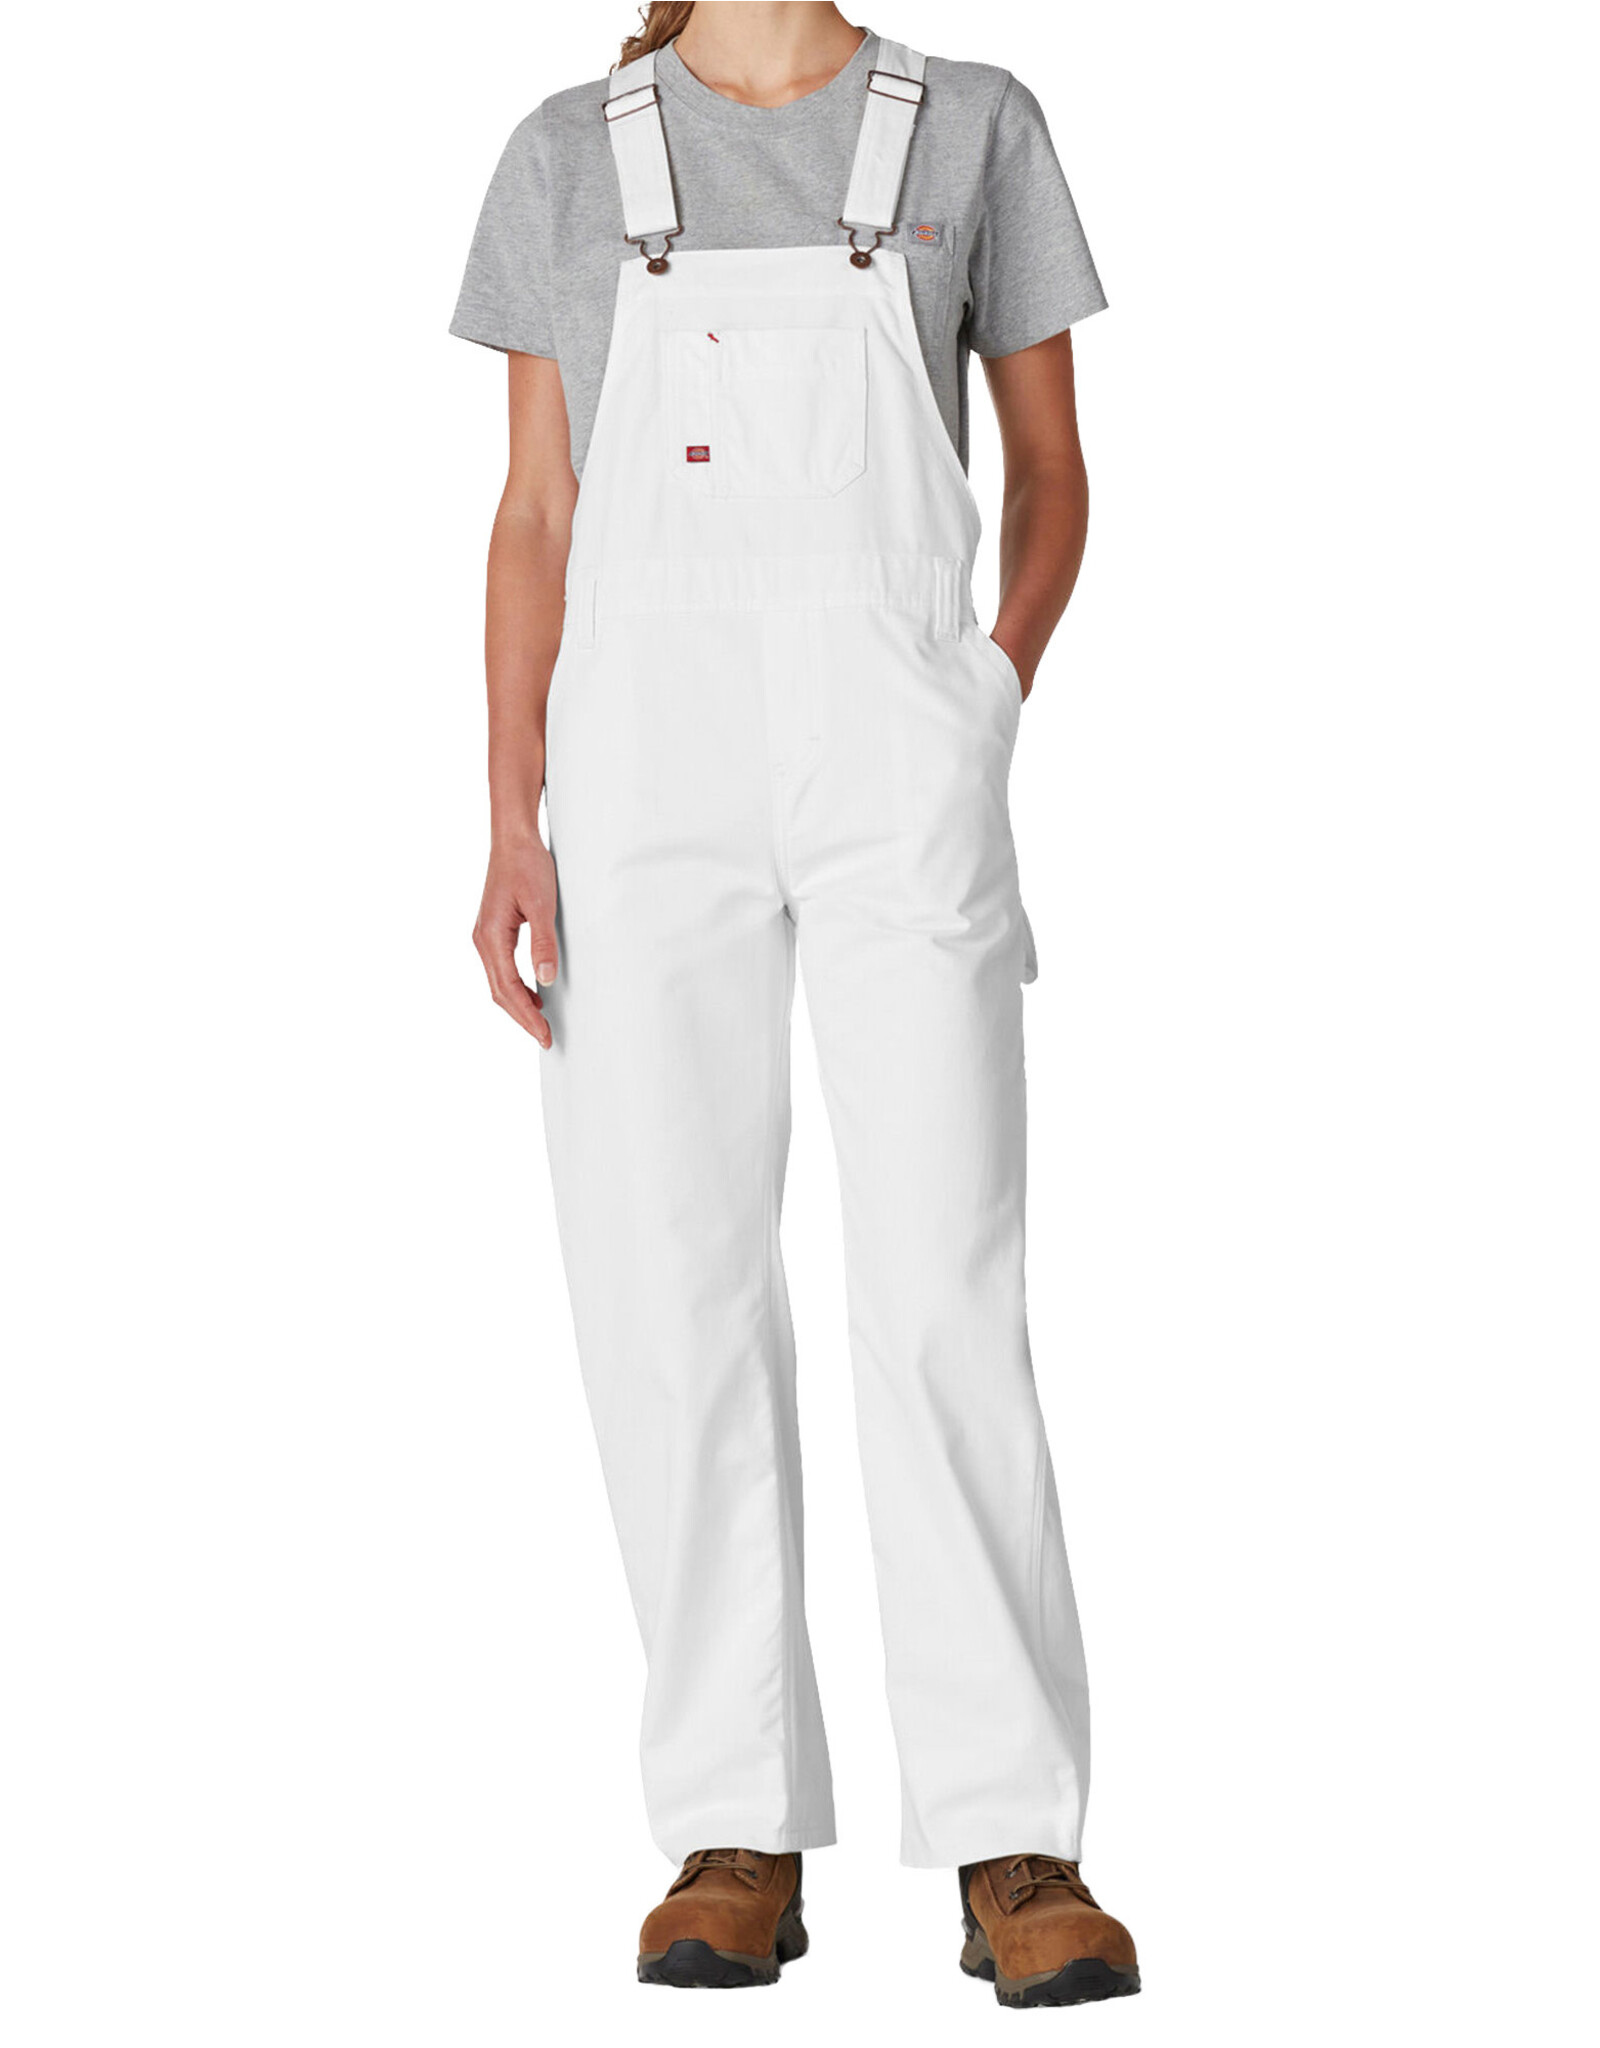 DICKIES Women's Relaxed Fit Bib Overalls White - FB206WH